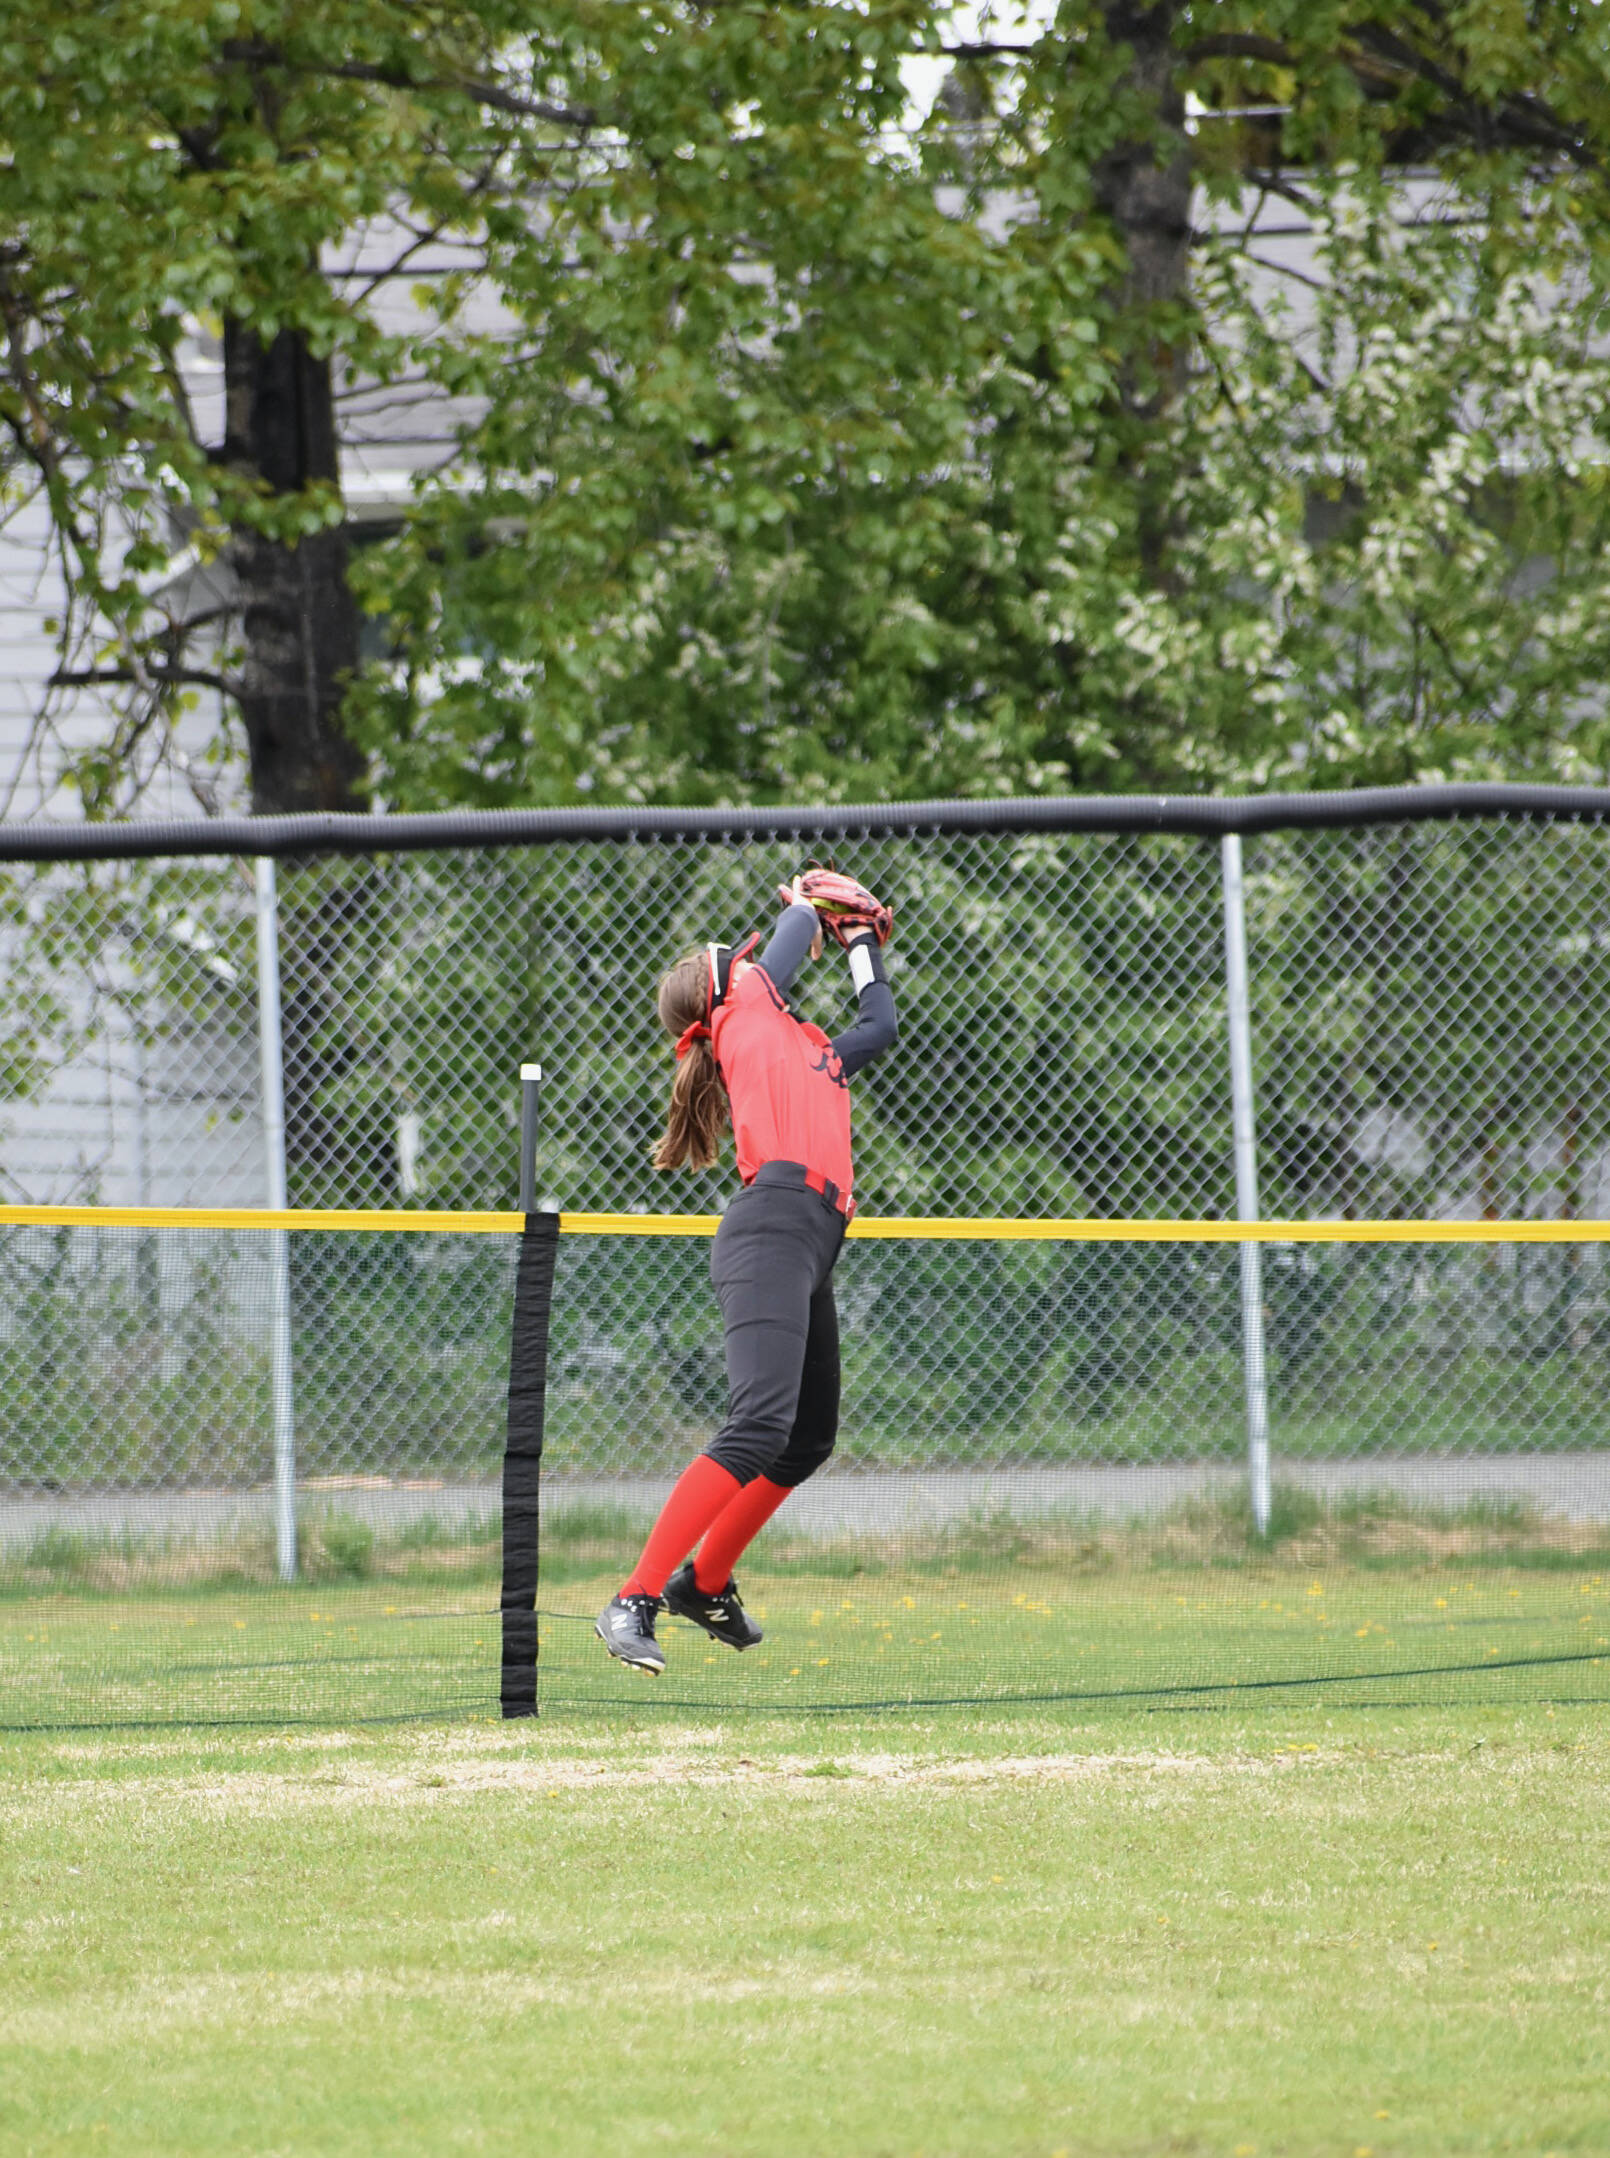 JDHS senior left fielder Carlynn Casperson catches a fly ball out over the fence during the Crimson Bears 6-5 win over the Sitka Wolves on Saturday for the ASAA Division II State Softball Championship at Anchorage’s Cartee Fields. (Courtesy Photo /JDHS Softball)